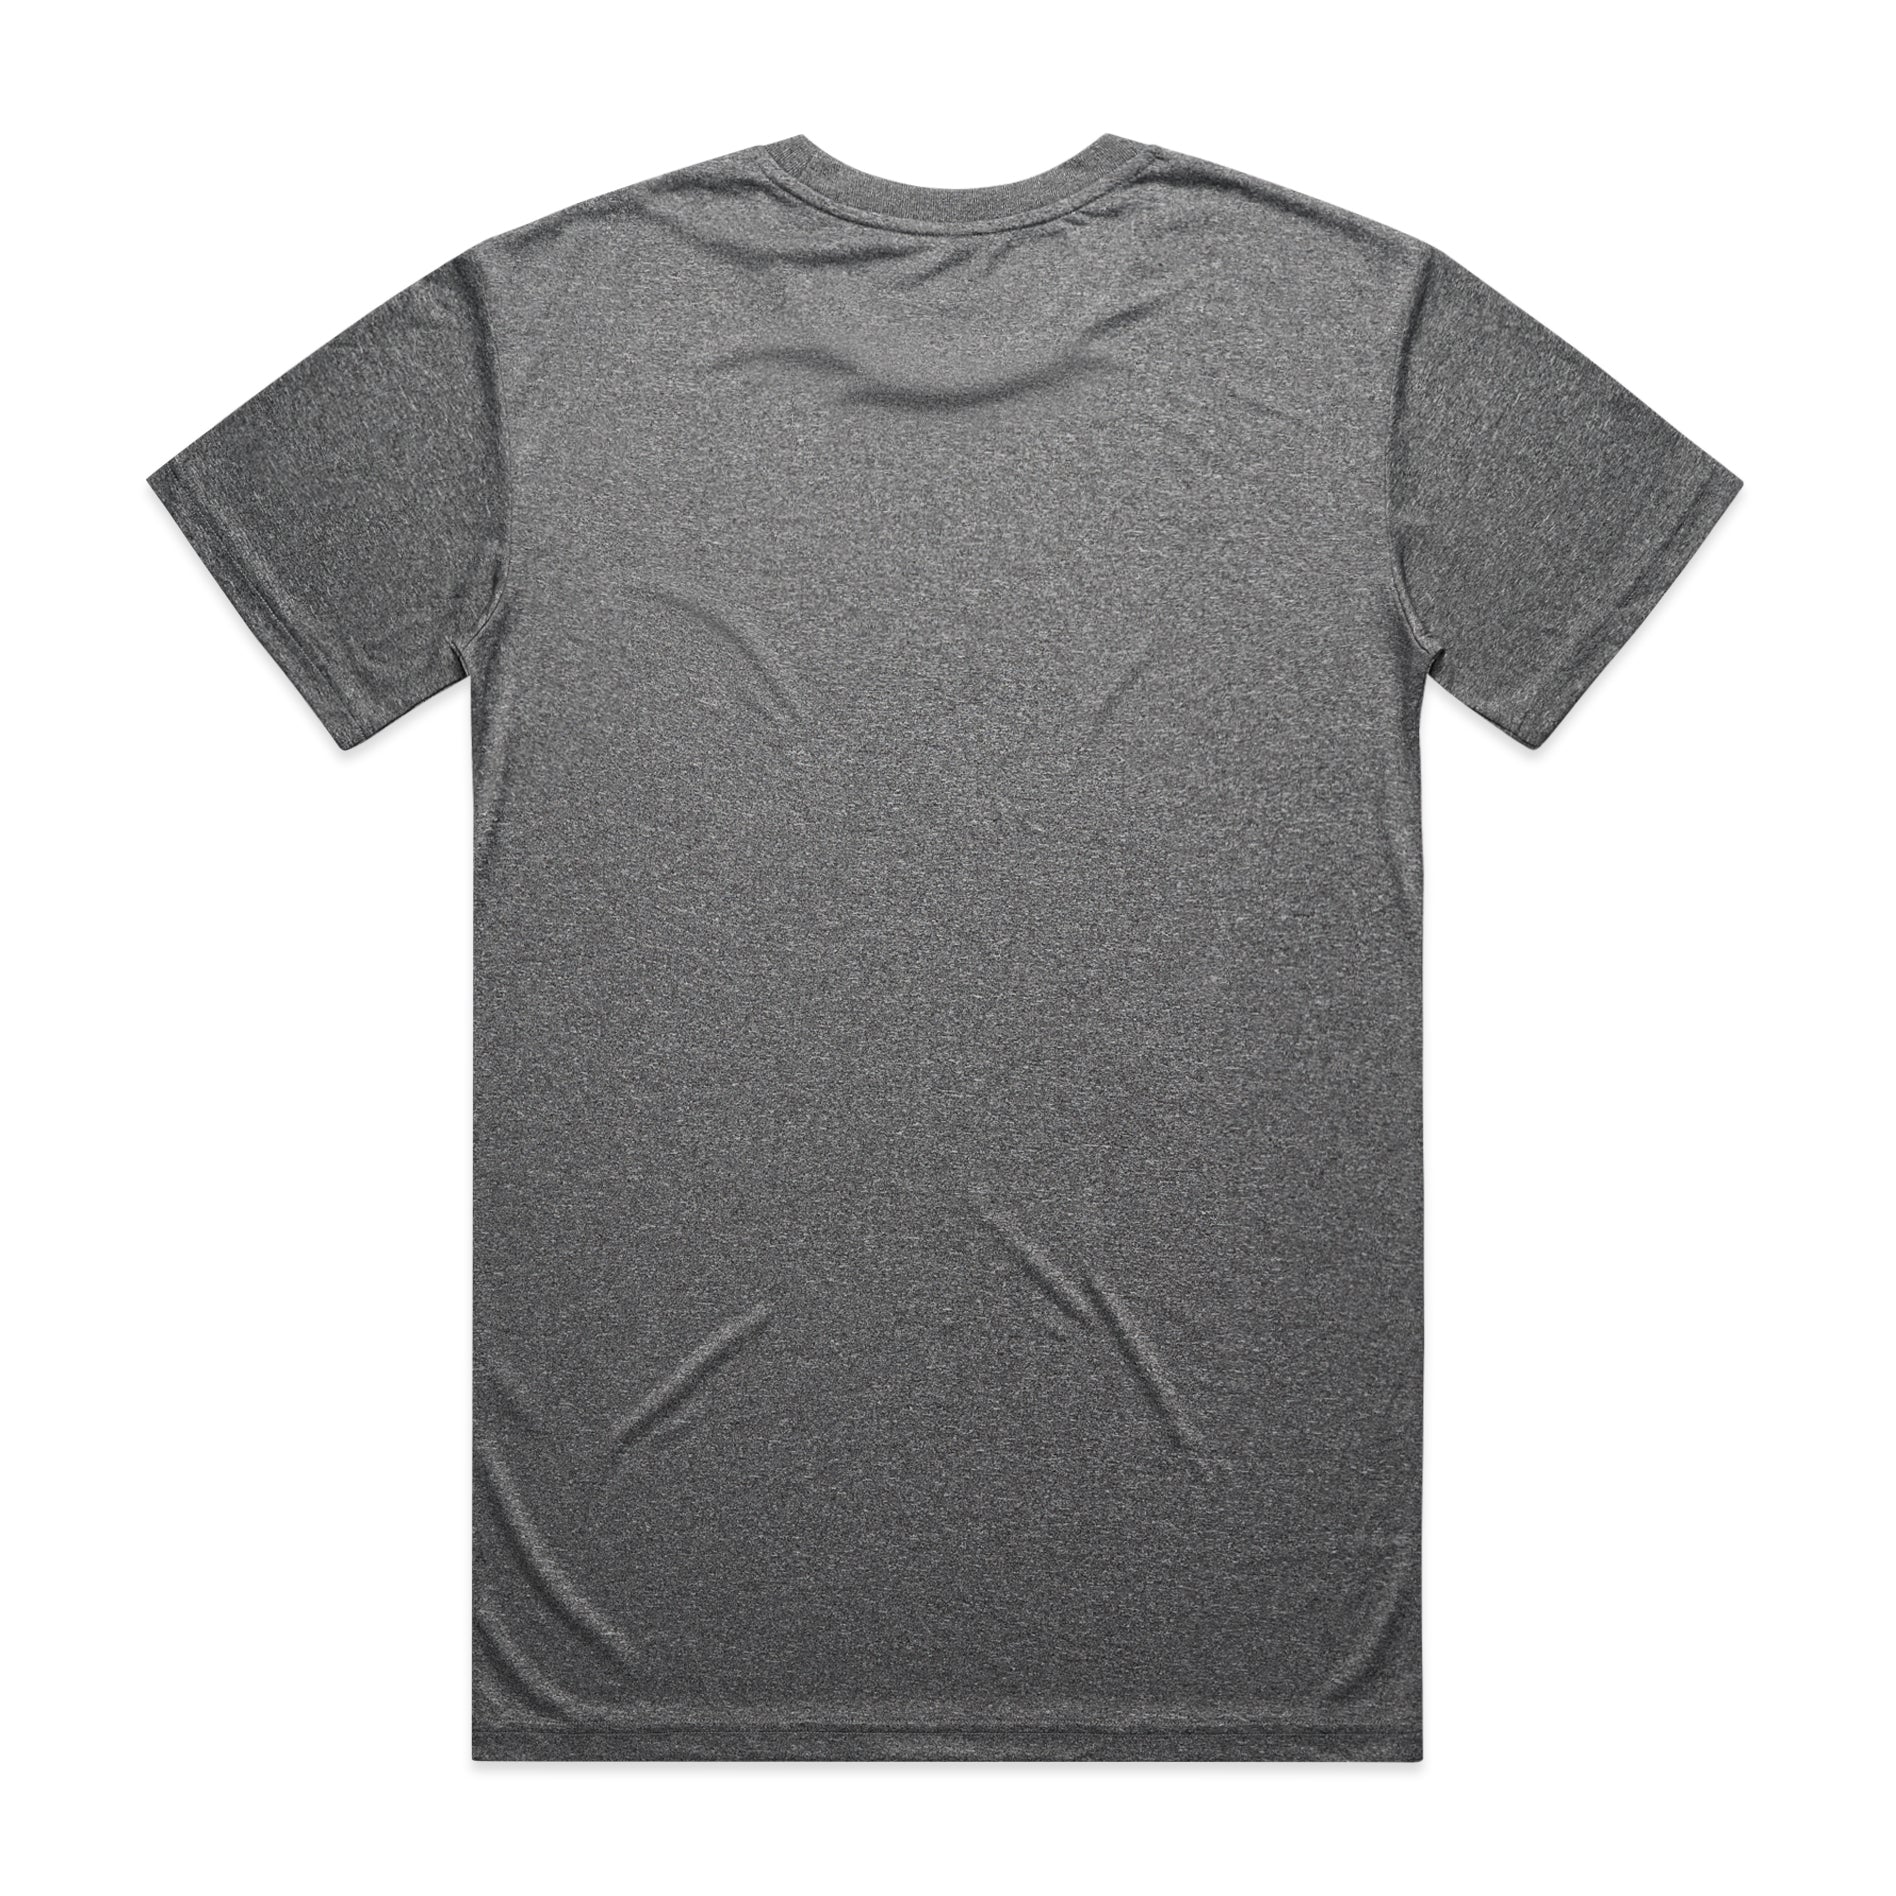 The Graphite Active T-Shirt by Second Skinz